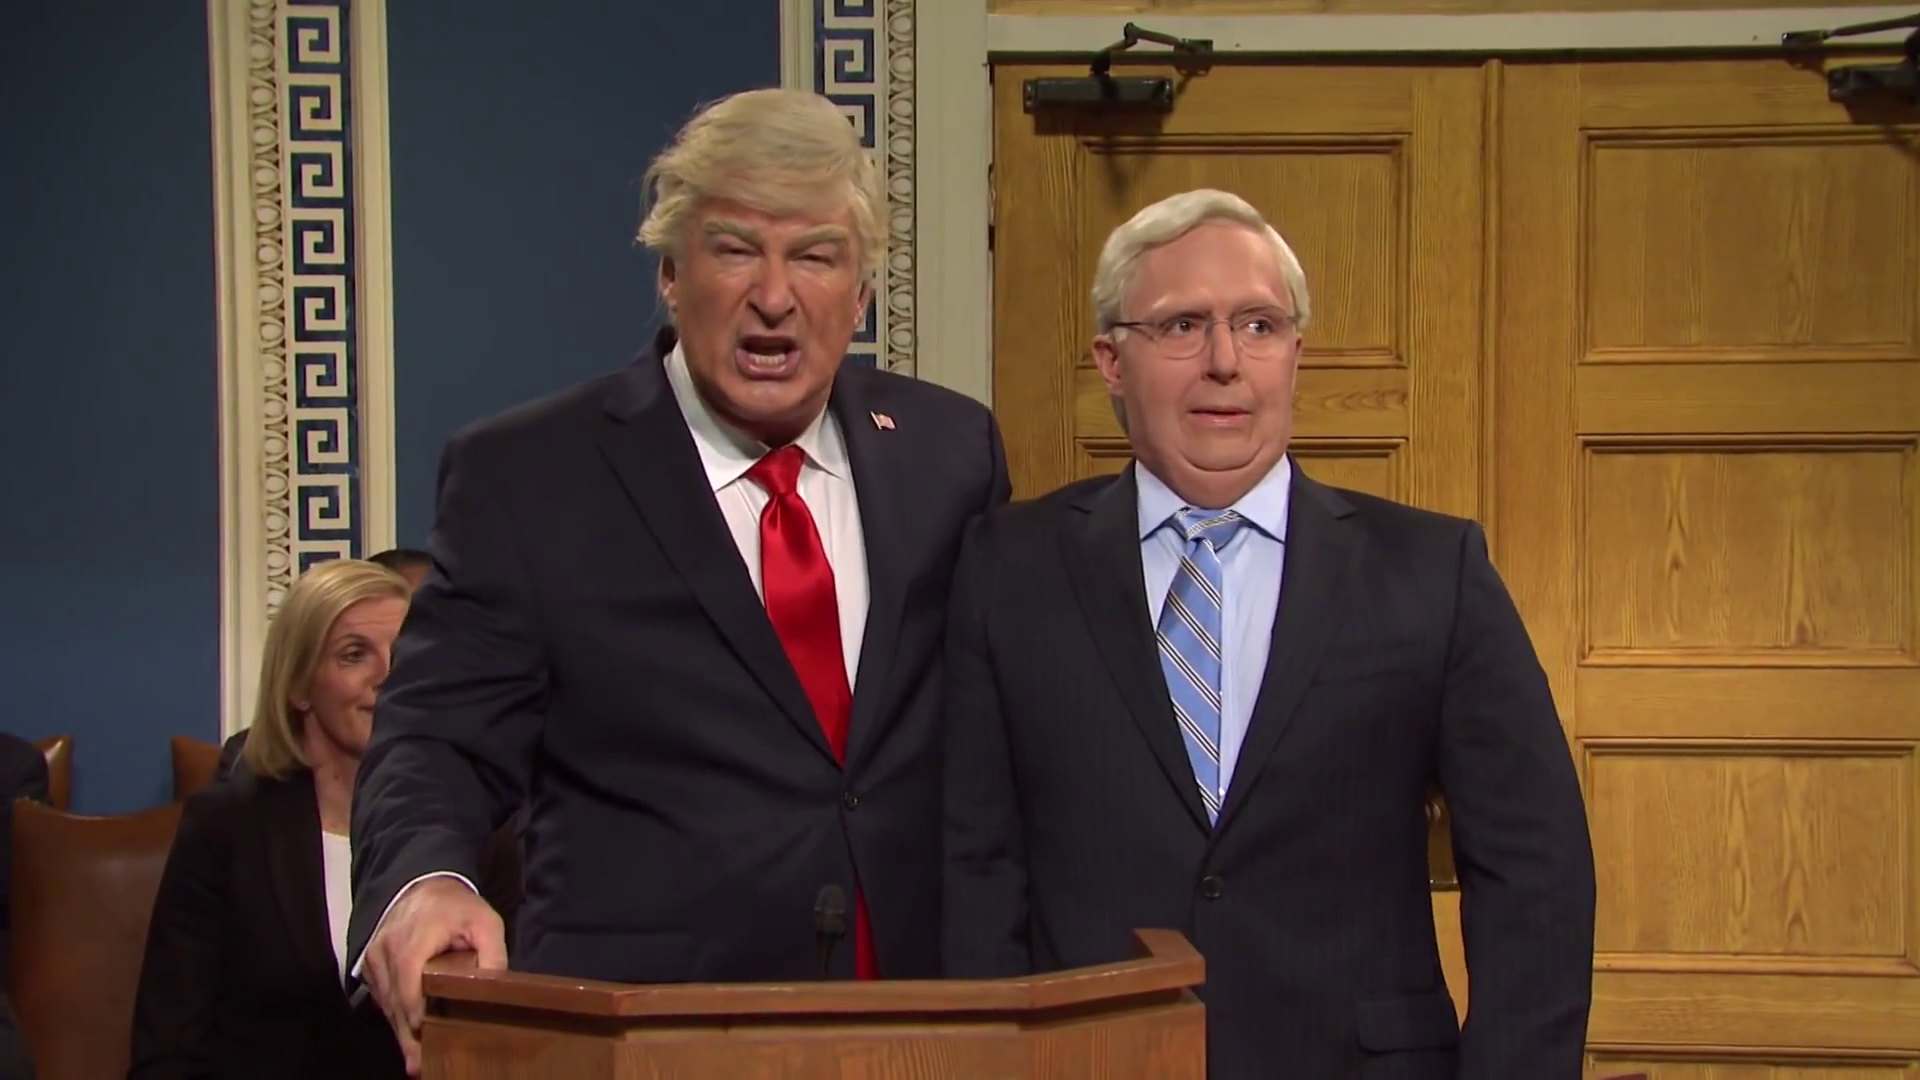 SNL Cold Open Imagines The Senate Trial You 'Wish Had Happened